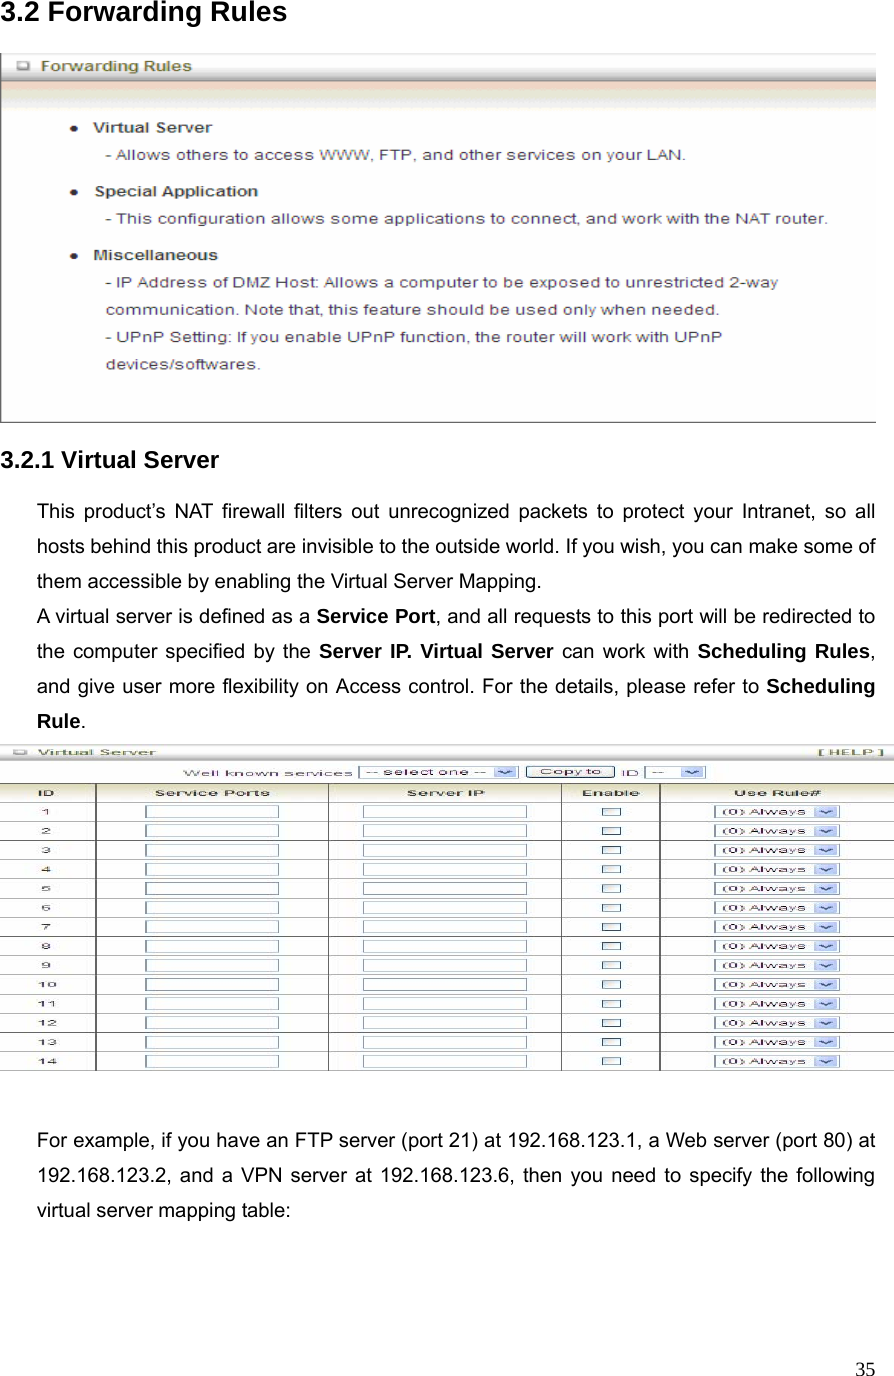  353.2 Forwarding Rules    3.2.1 Virtual Server  This product’s NAT firewall filters out unrecognized packets to protect your Intranet, so all hosts behind this product are invisible to the outside world. If you wish, you can make some of them accessible by enabling the Virtual Server Mapping. A virtual server is defined as a Service Port, and all requests to this port will be redirected to the computer specified by the Server IP. Virtual Server can work with Scheduling Rules, and give user more flexibility on Access control. For the details, please refer to Scheduling Rule.    For example, if you have an FTP server (port 21) at 192.168.123.1, a Web server (port 80) at 192.168.123.2, and a VPN server at 192.168.123.6, then you need to specify the following virtual server mapping table:   